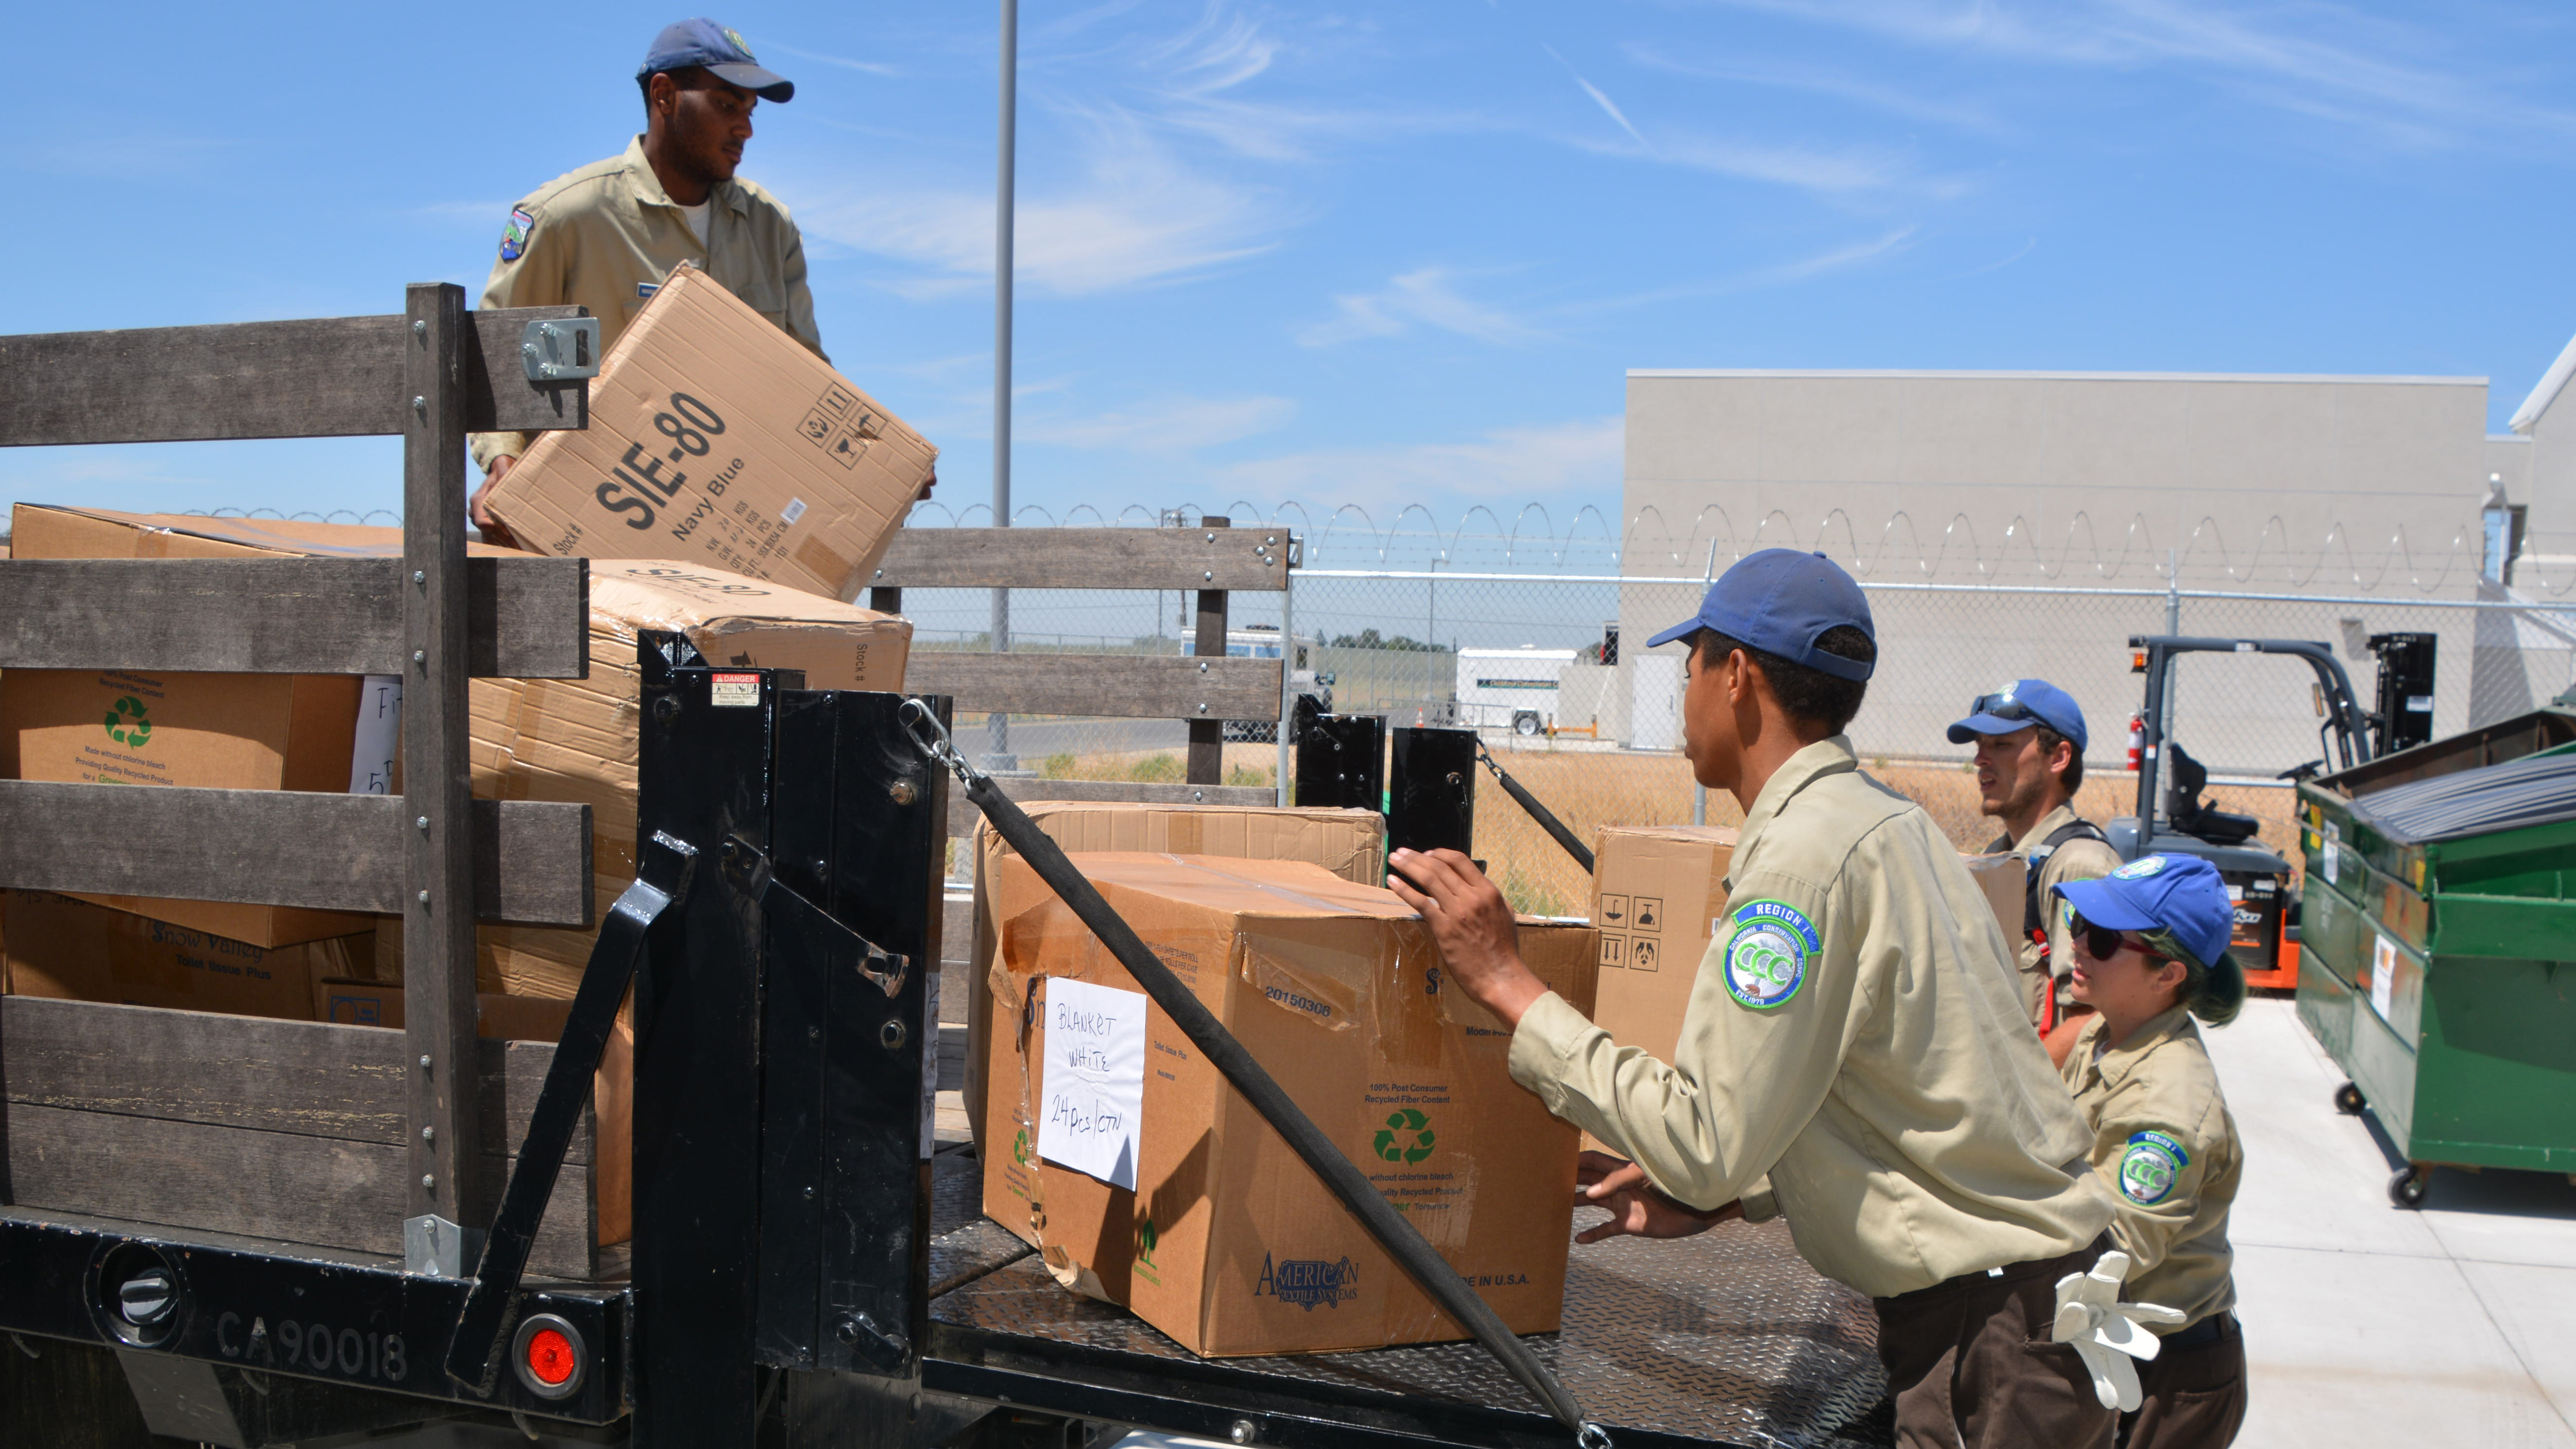 Delta Corpsmembers unloading boxes from a truck bed.